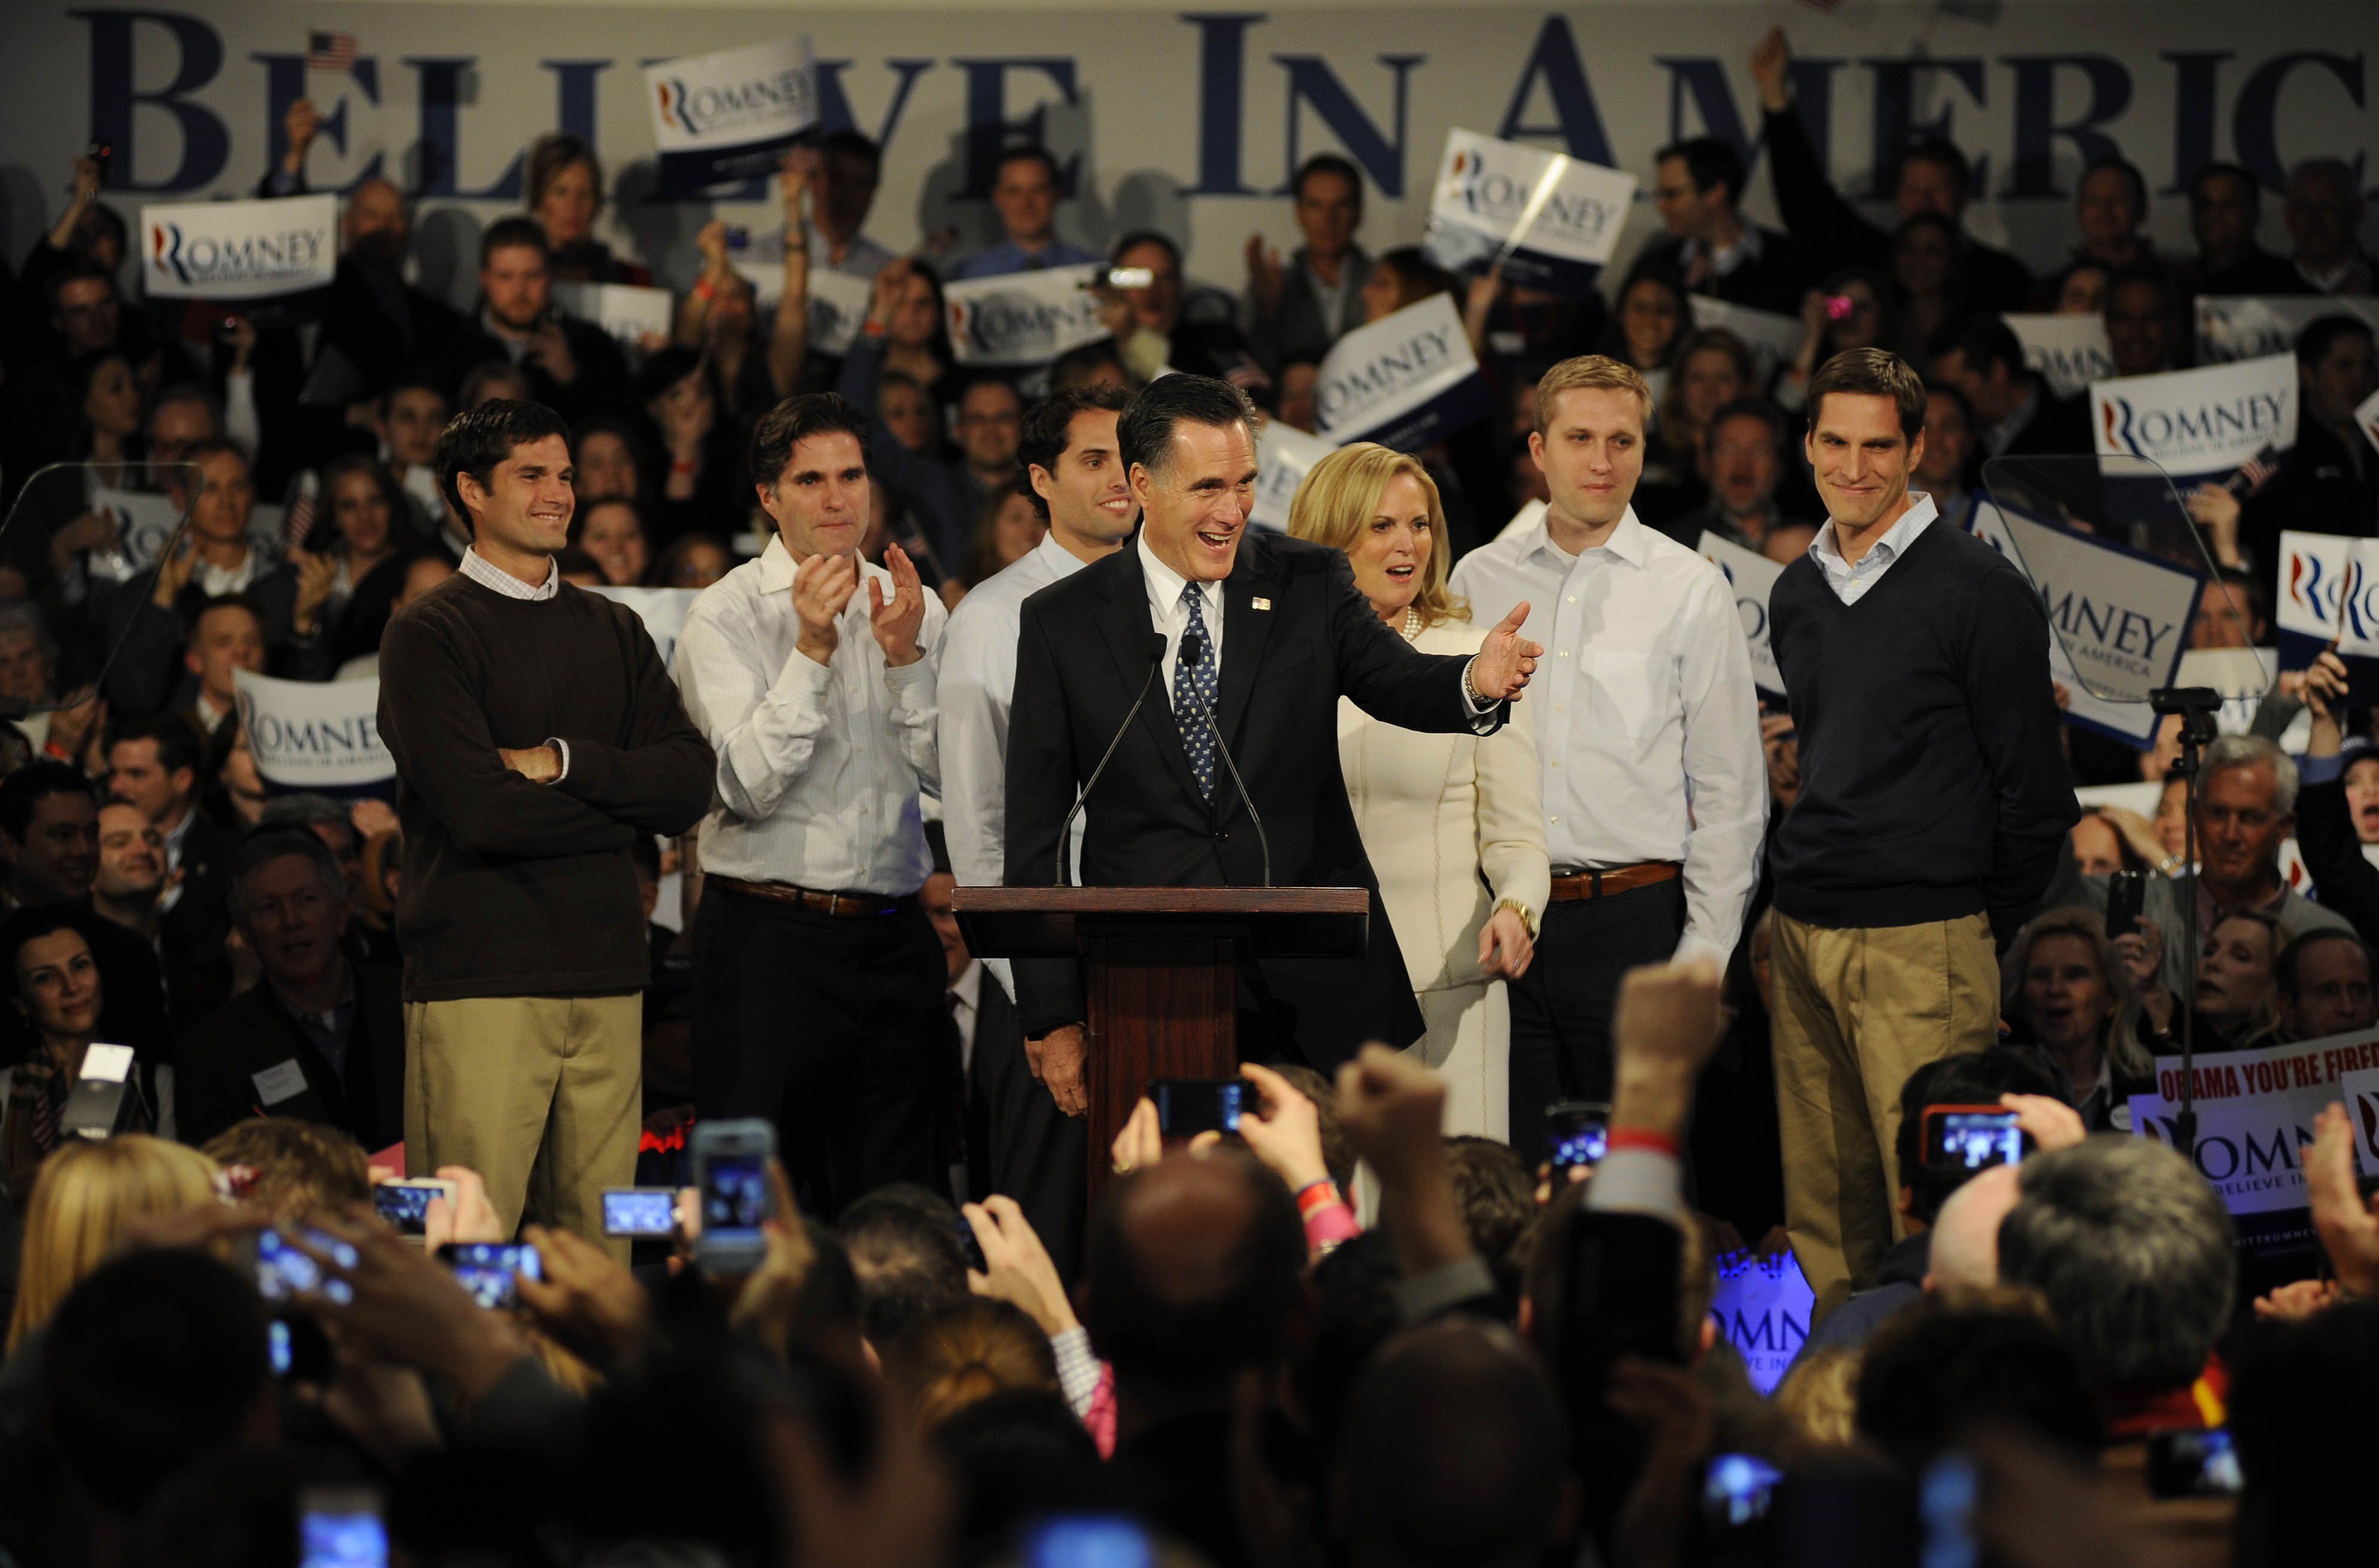 Mitt Romney with his family behind him at a campaign event